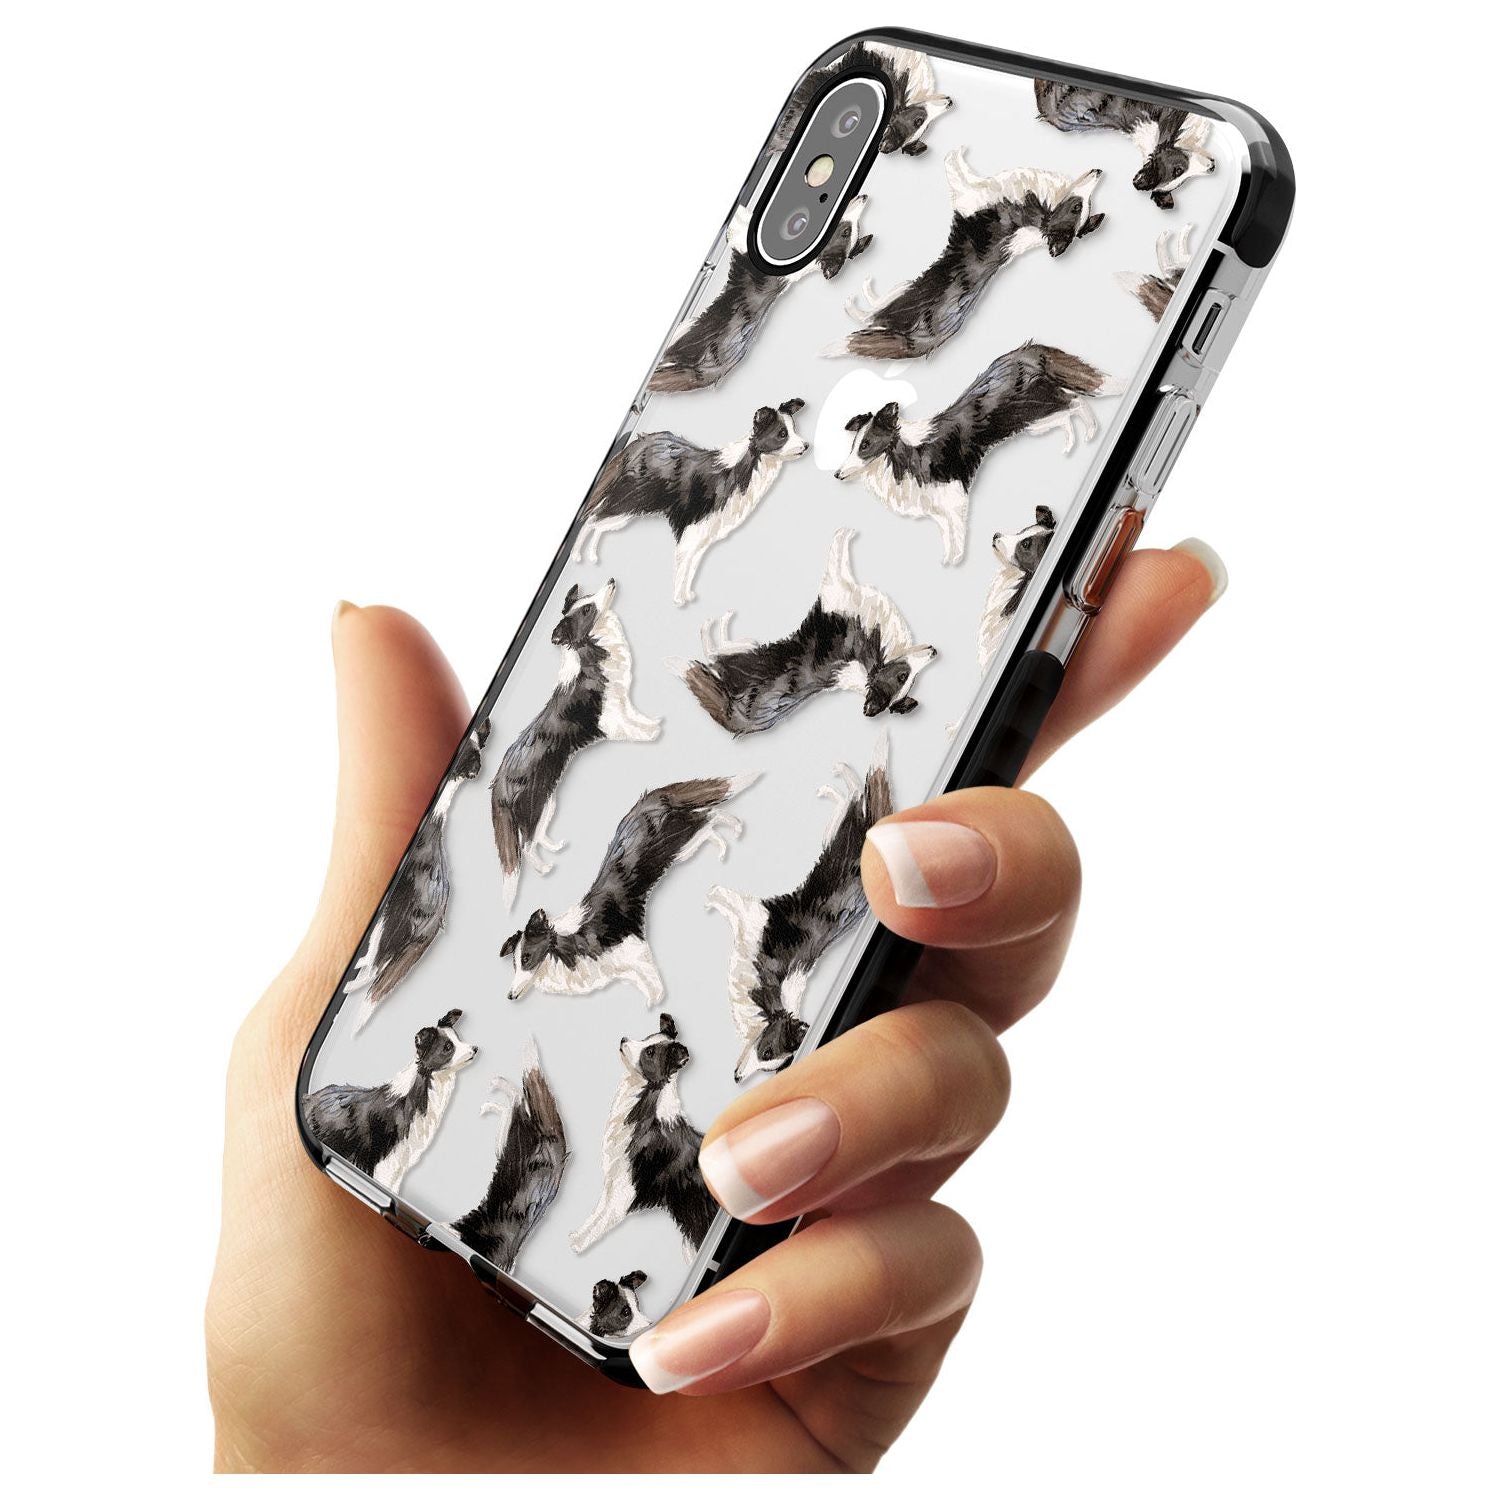 Border Collie Watercolour Dog Pattern Black Impact Phone Case for iPhone X XS Max XR